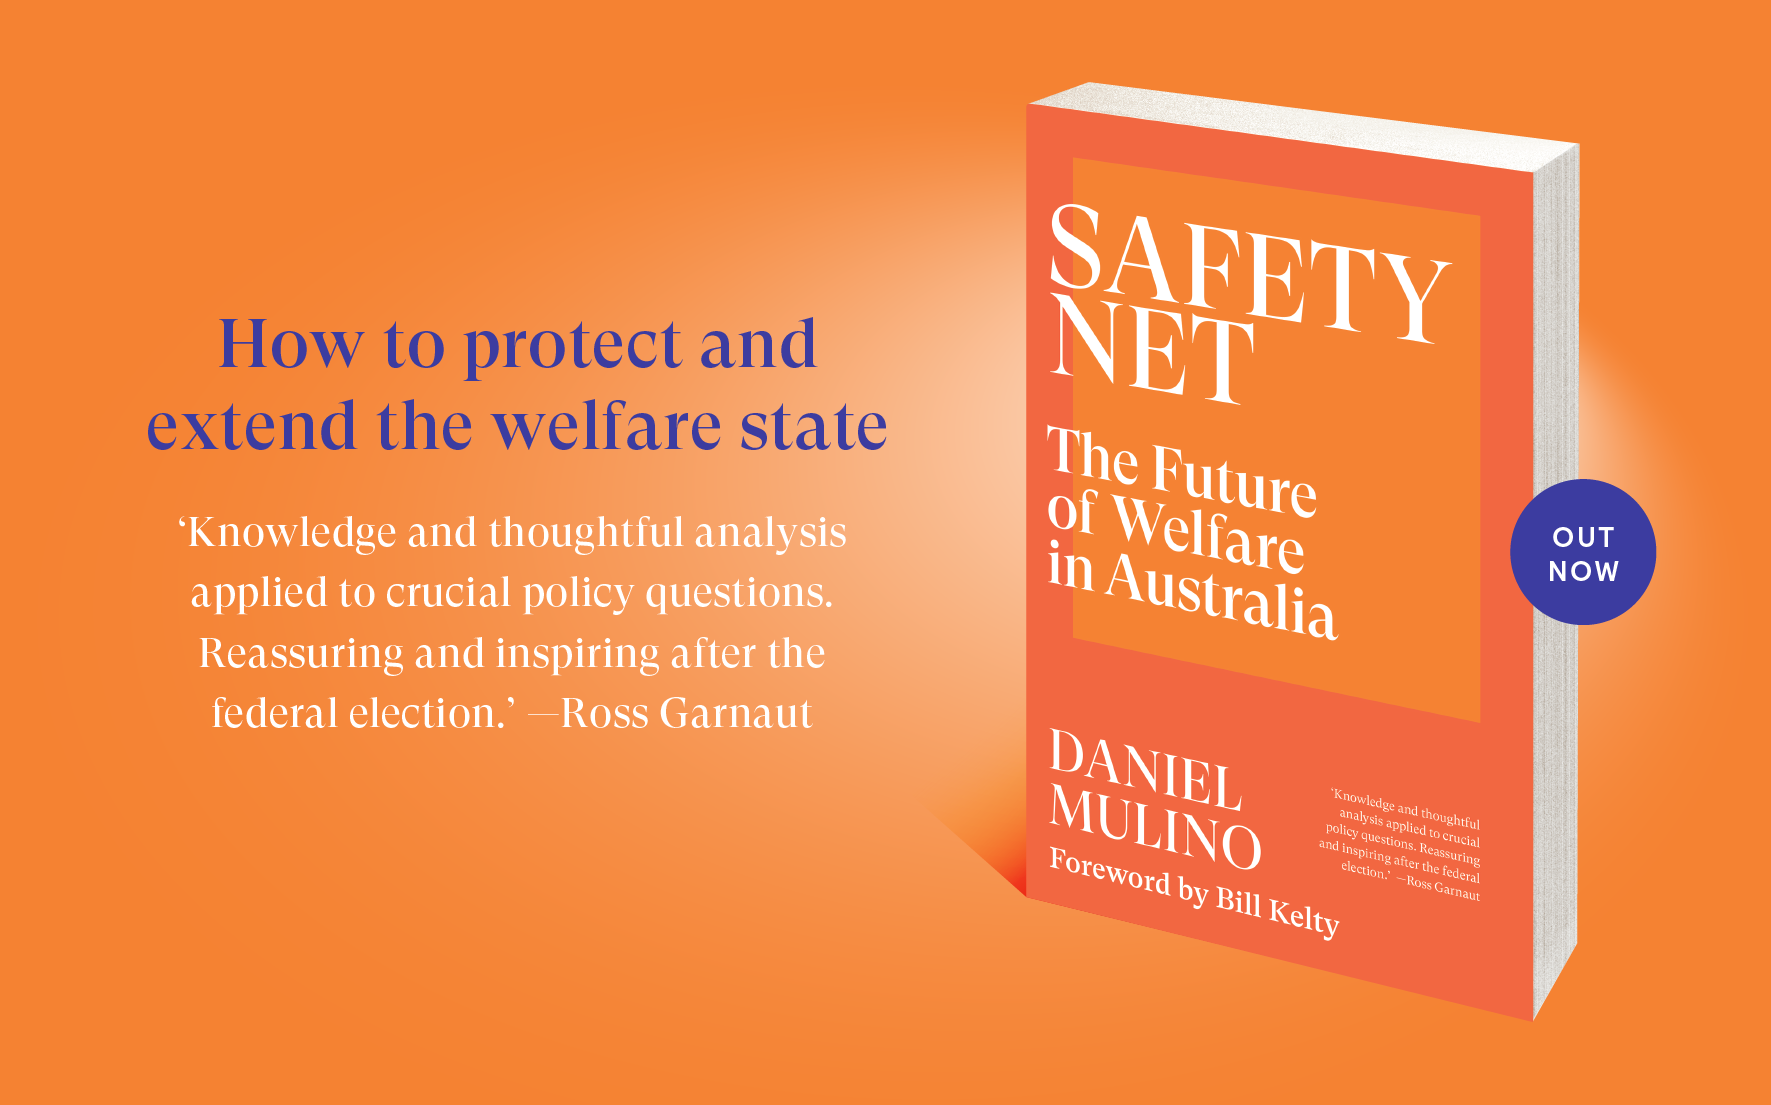 Out now: Safety Net